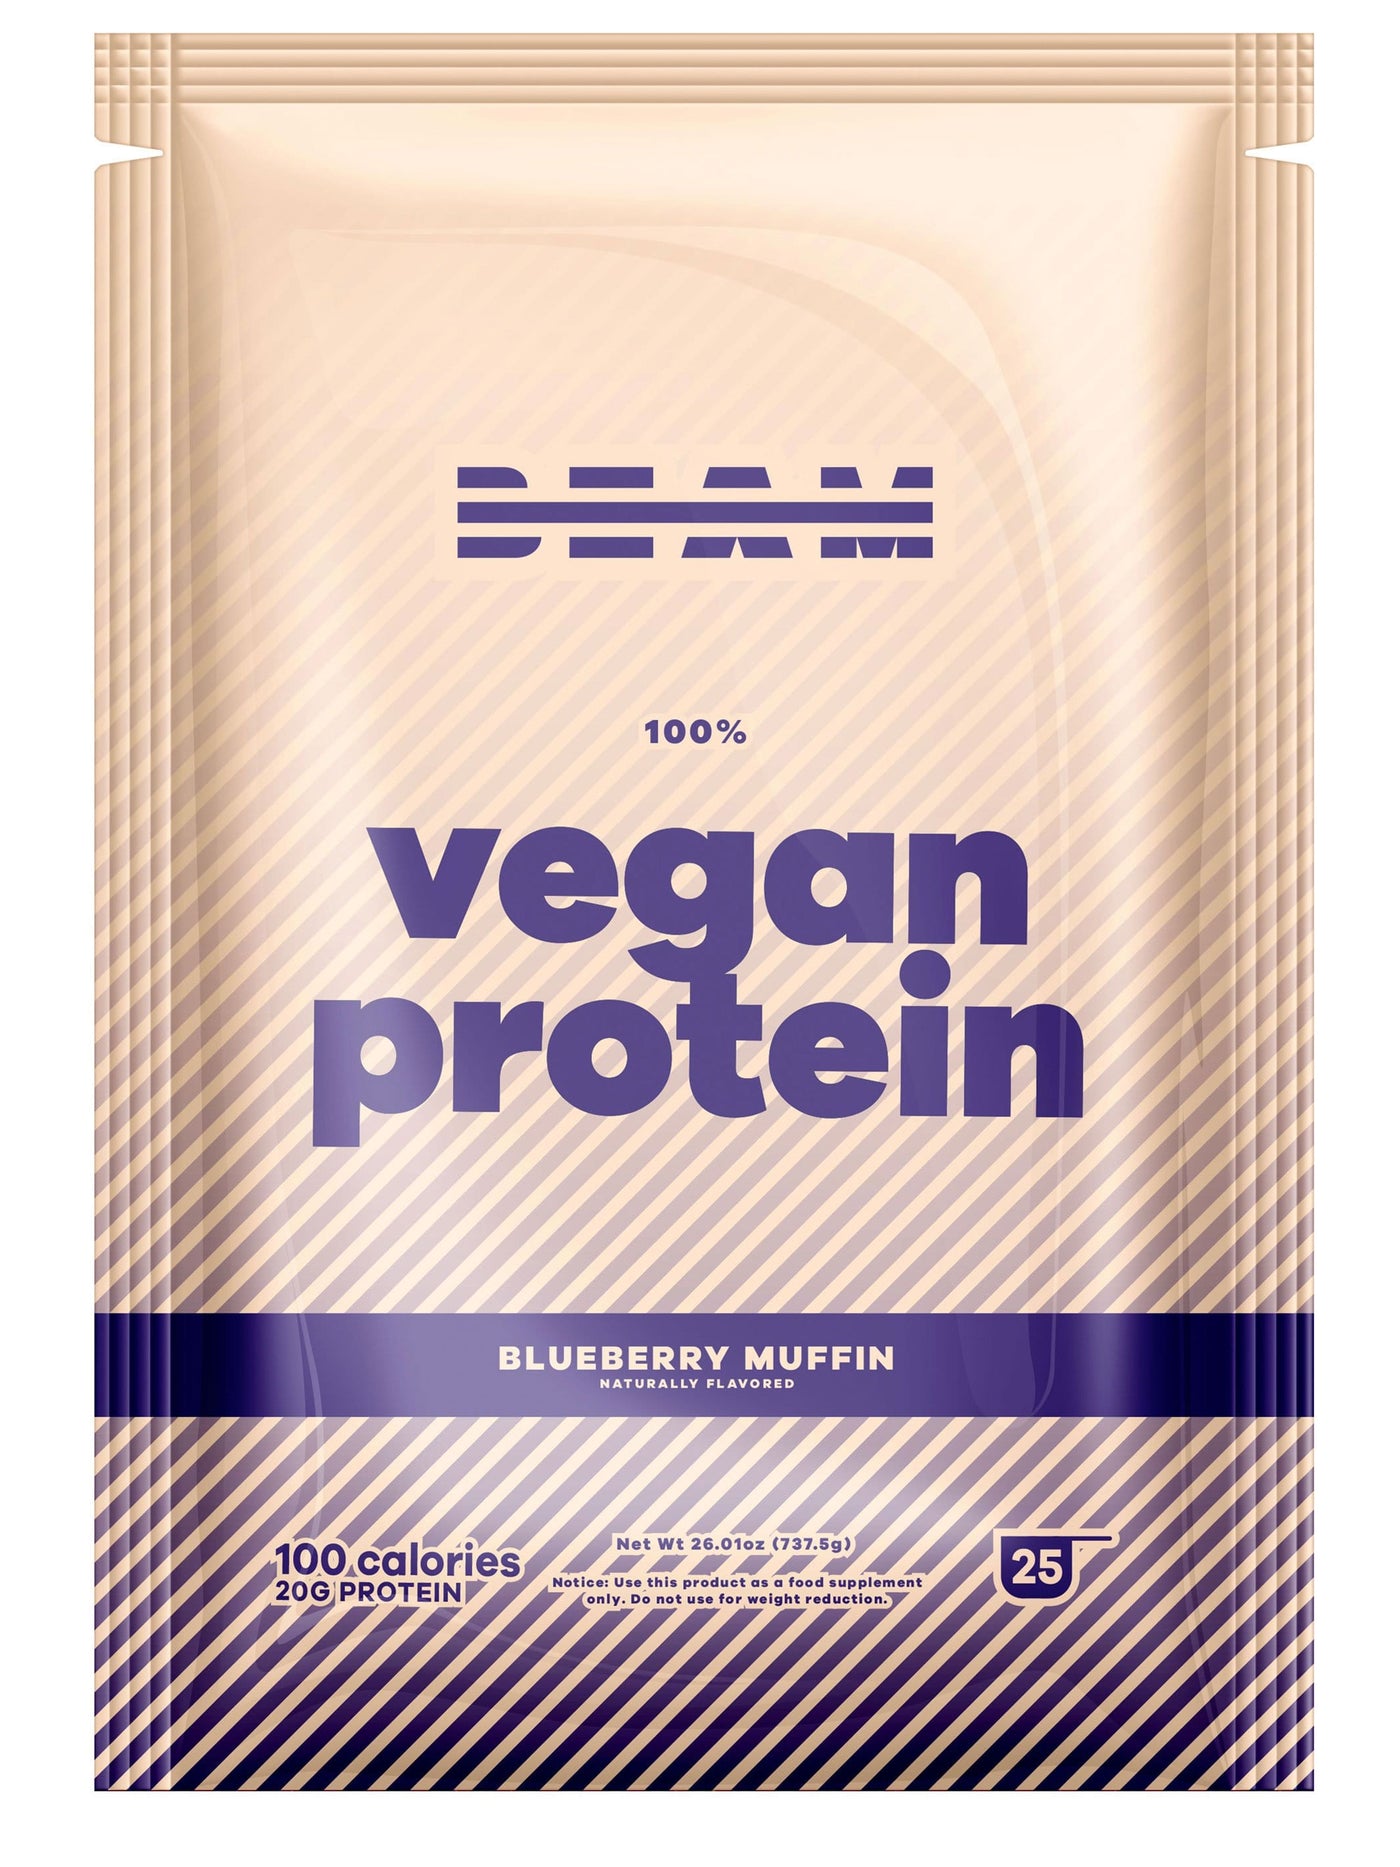 Blueberry Muffin BEAM Sample Pack Vegan Protein# 1 Serving / Blueberry Muffin